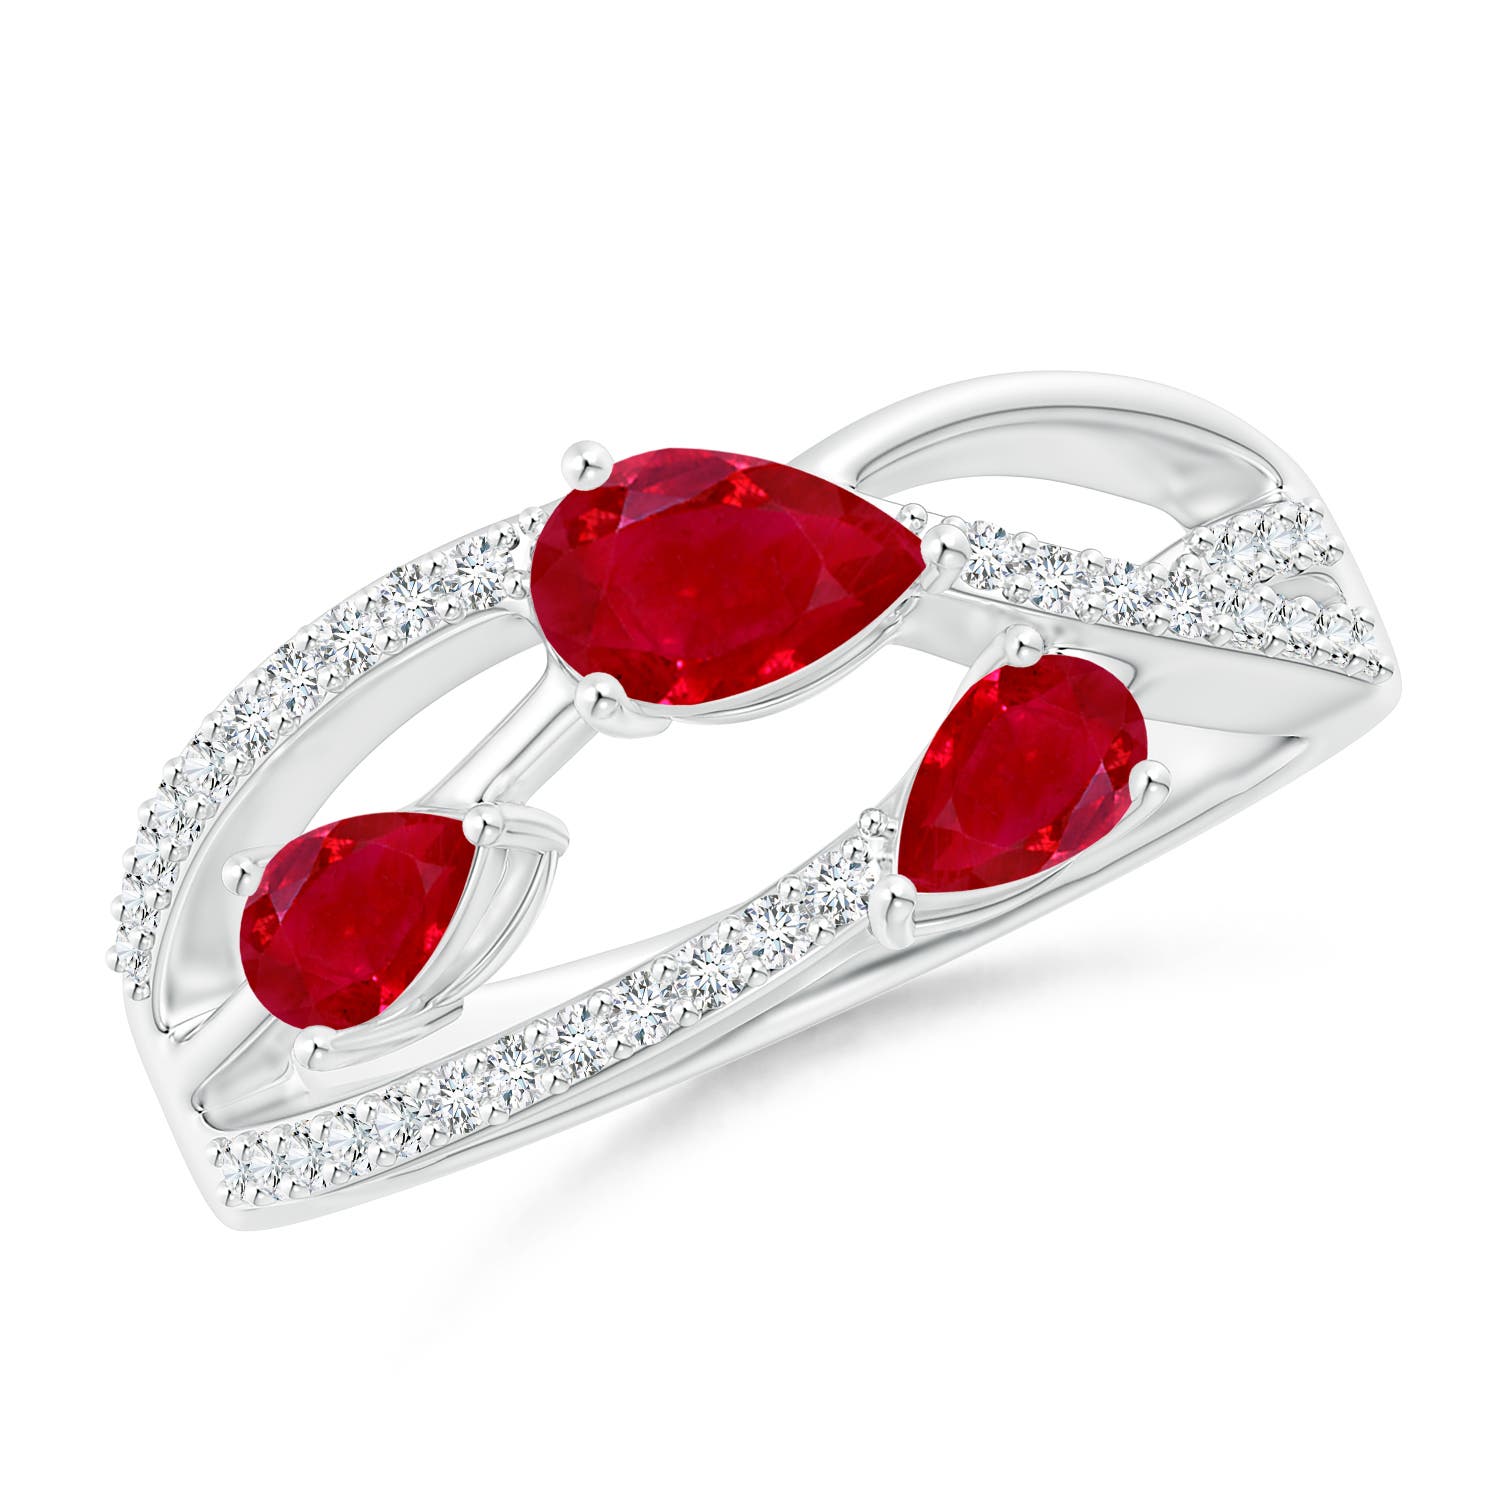 AAA - Ruby / 1.03 CT / 14 KT White Gold